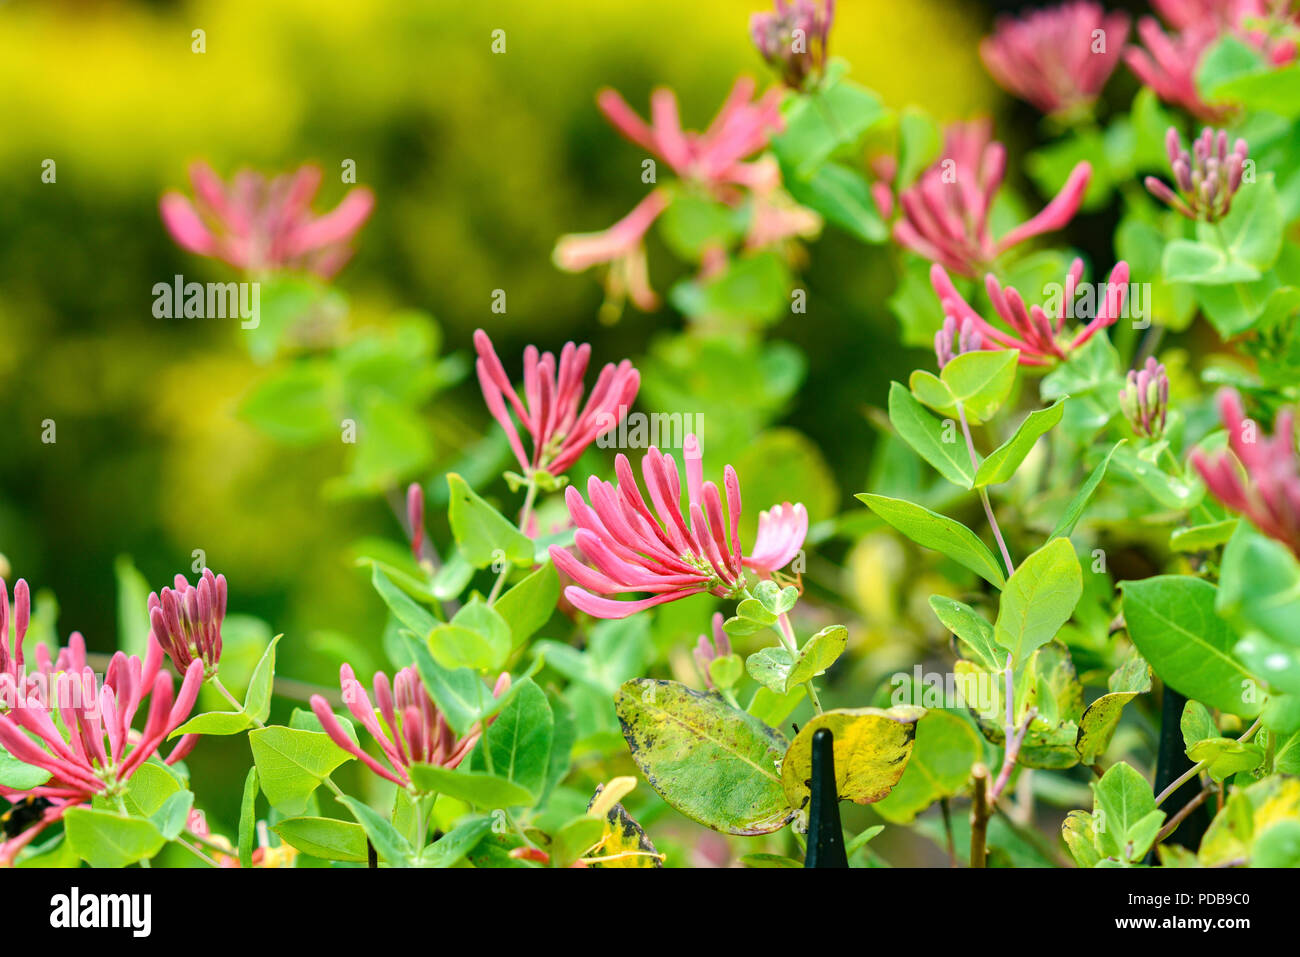 Pink lonicera blooming in the garden in summer. Stock Photo